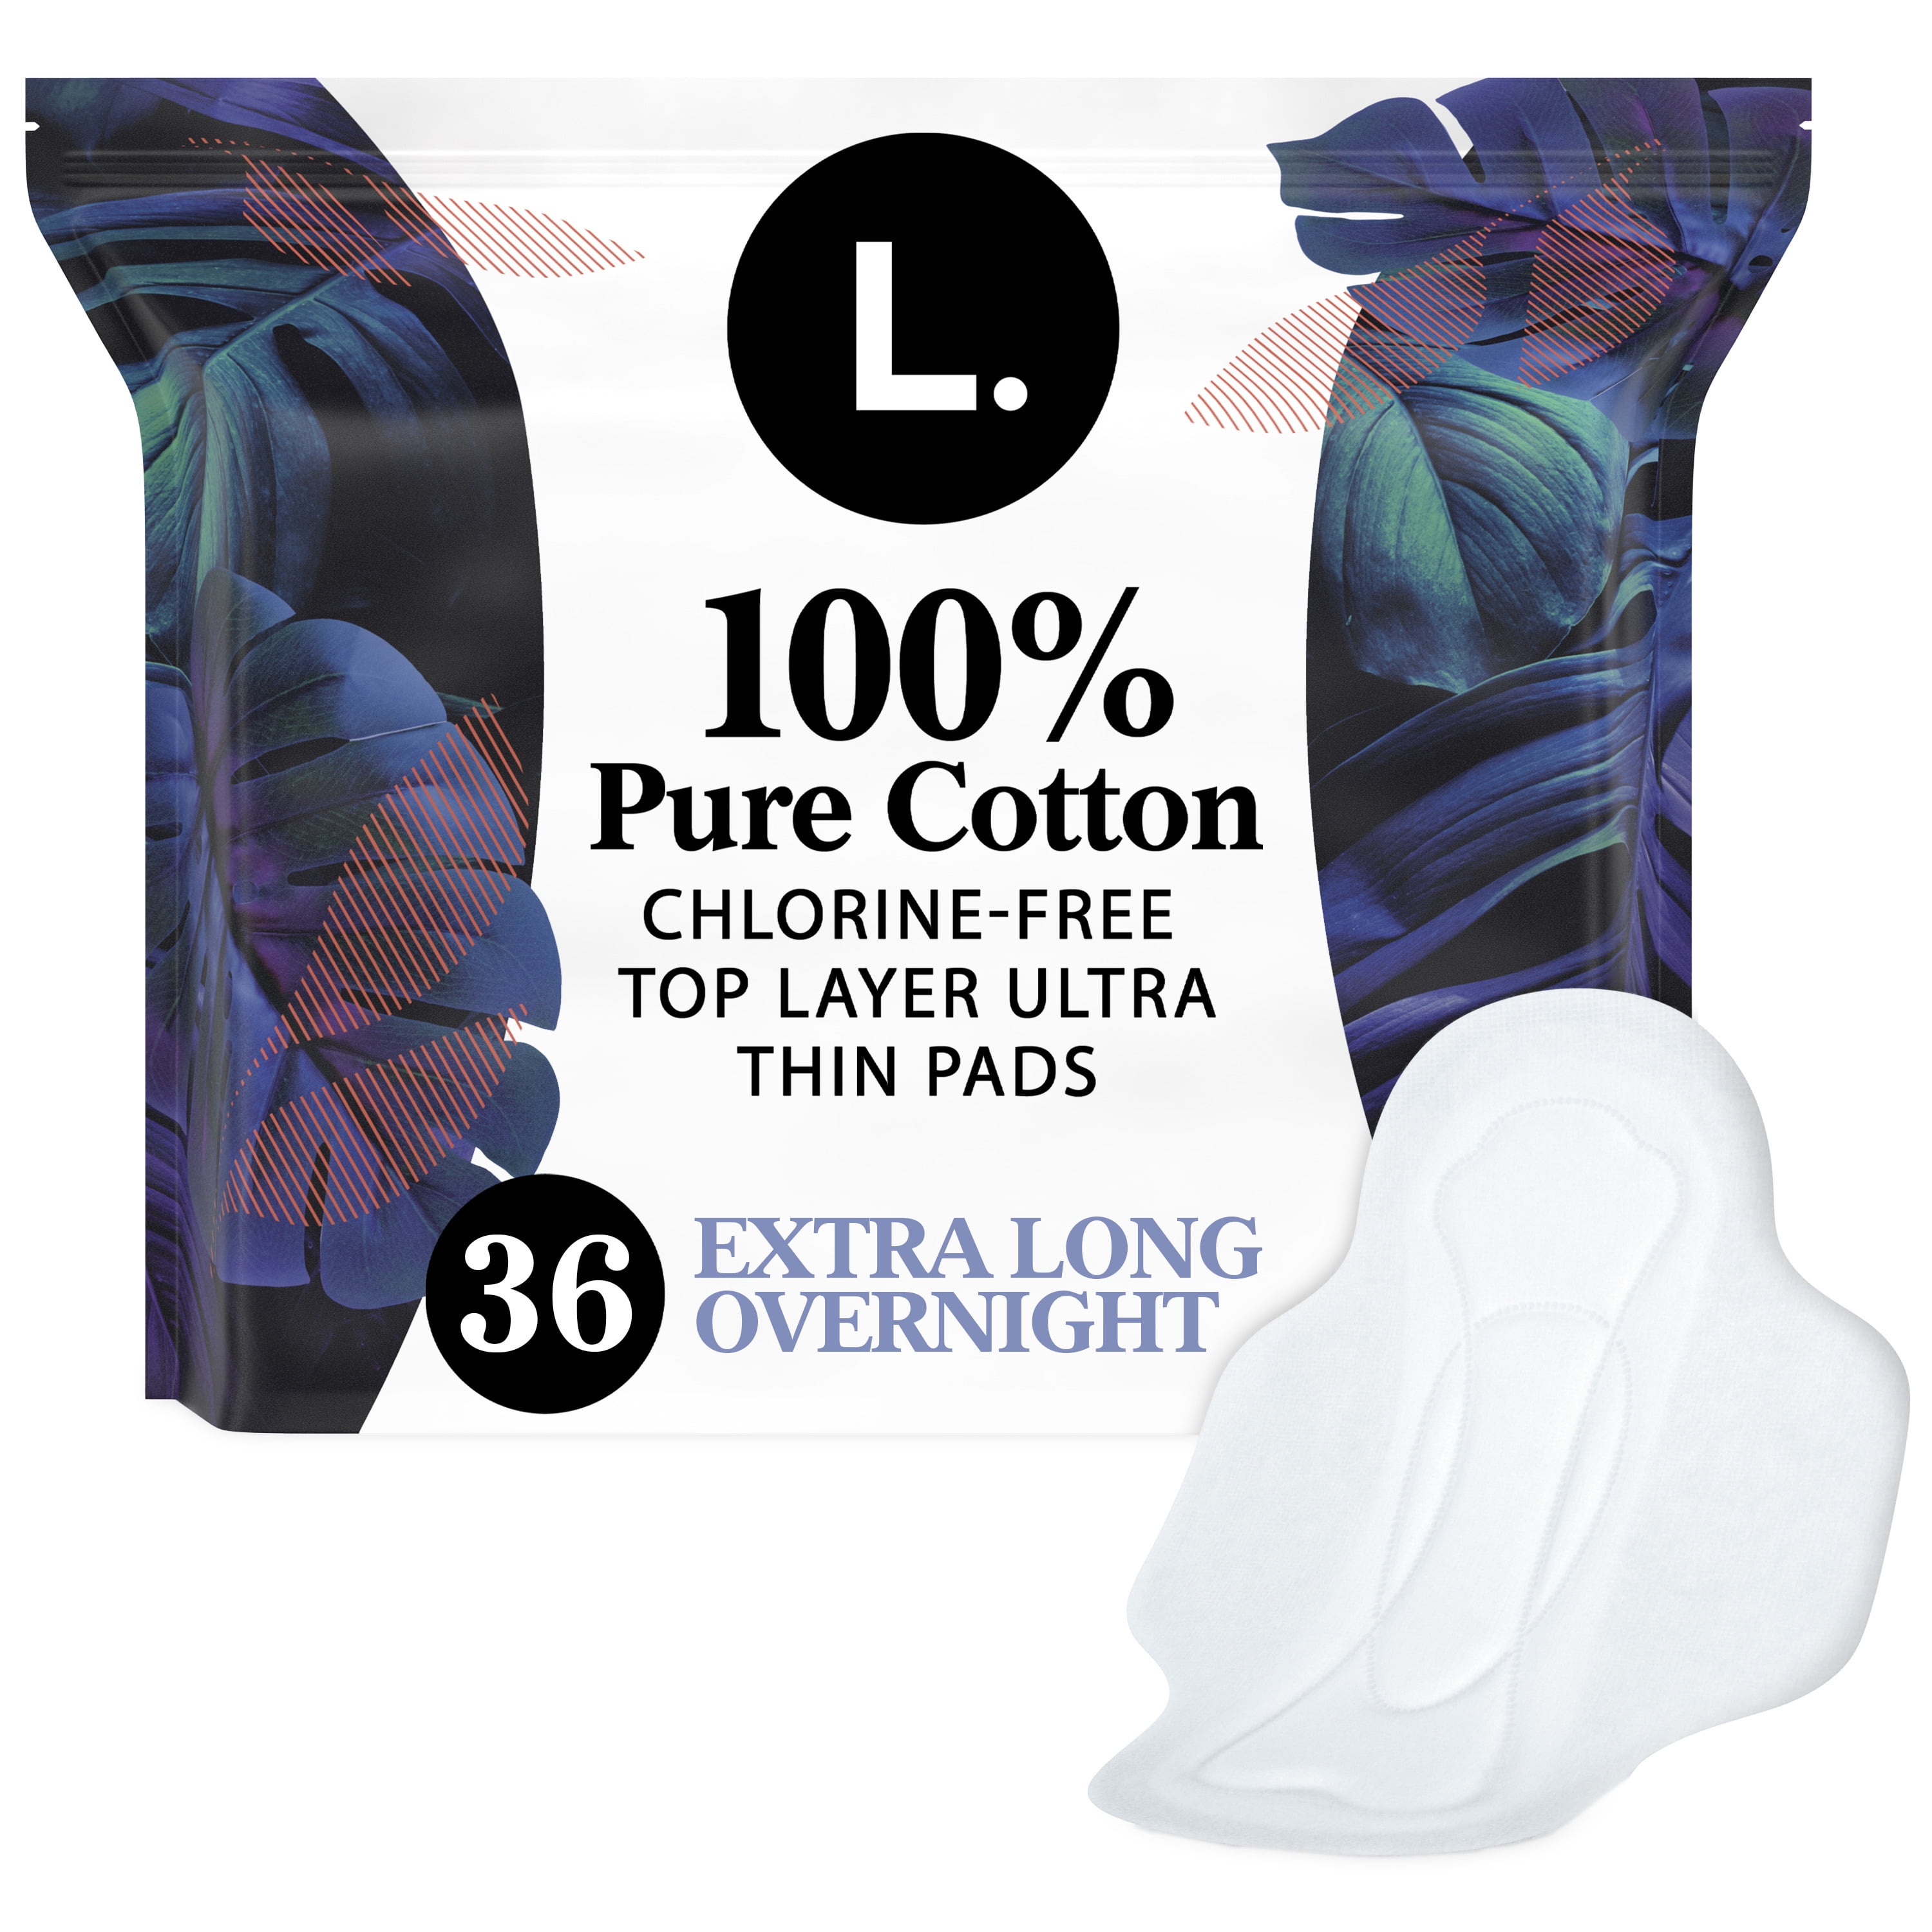 L. Ultra Thin Pads, Super Absorbency, 56 Ct, 100% Pure Cotton Top Layer 